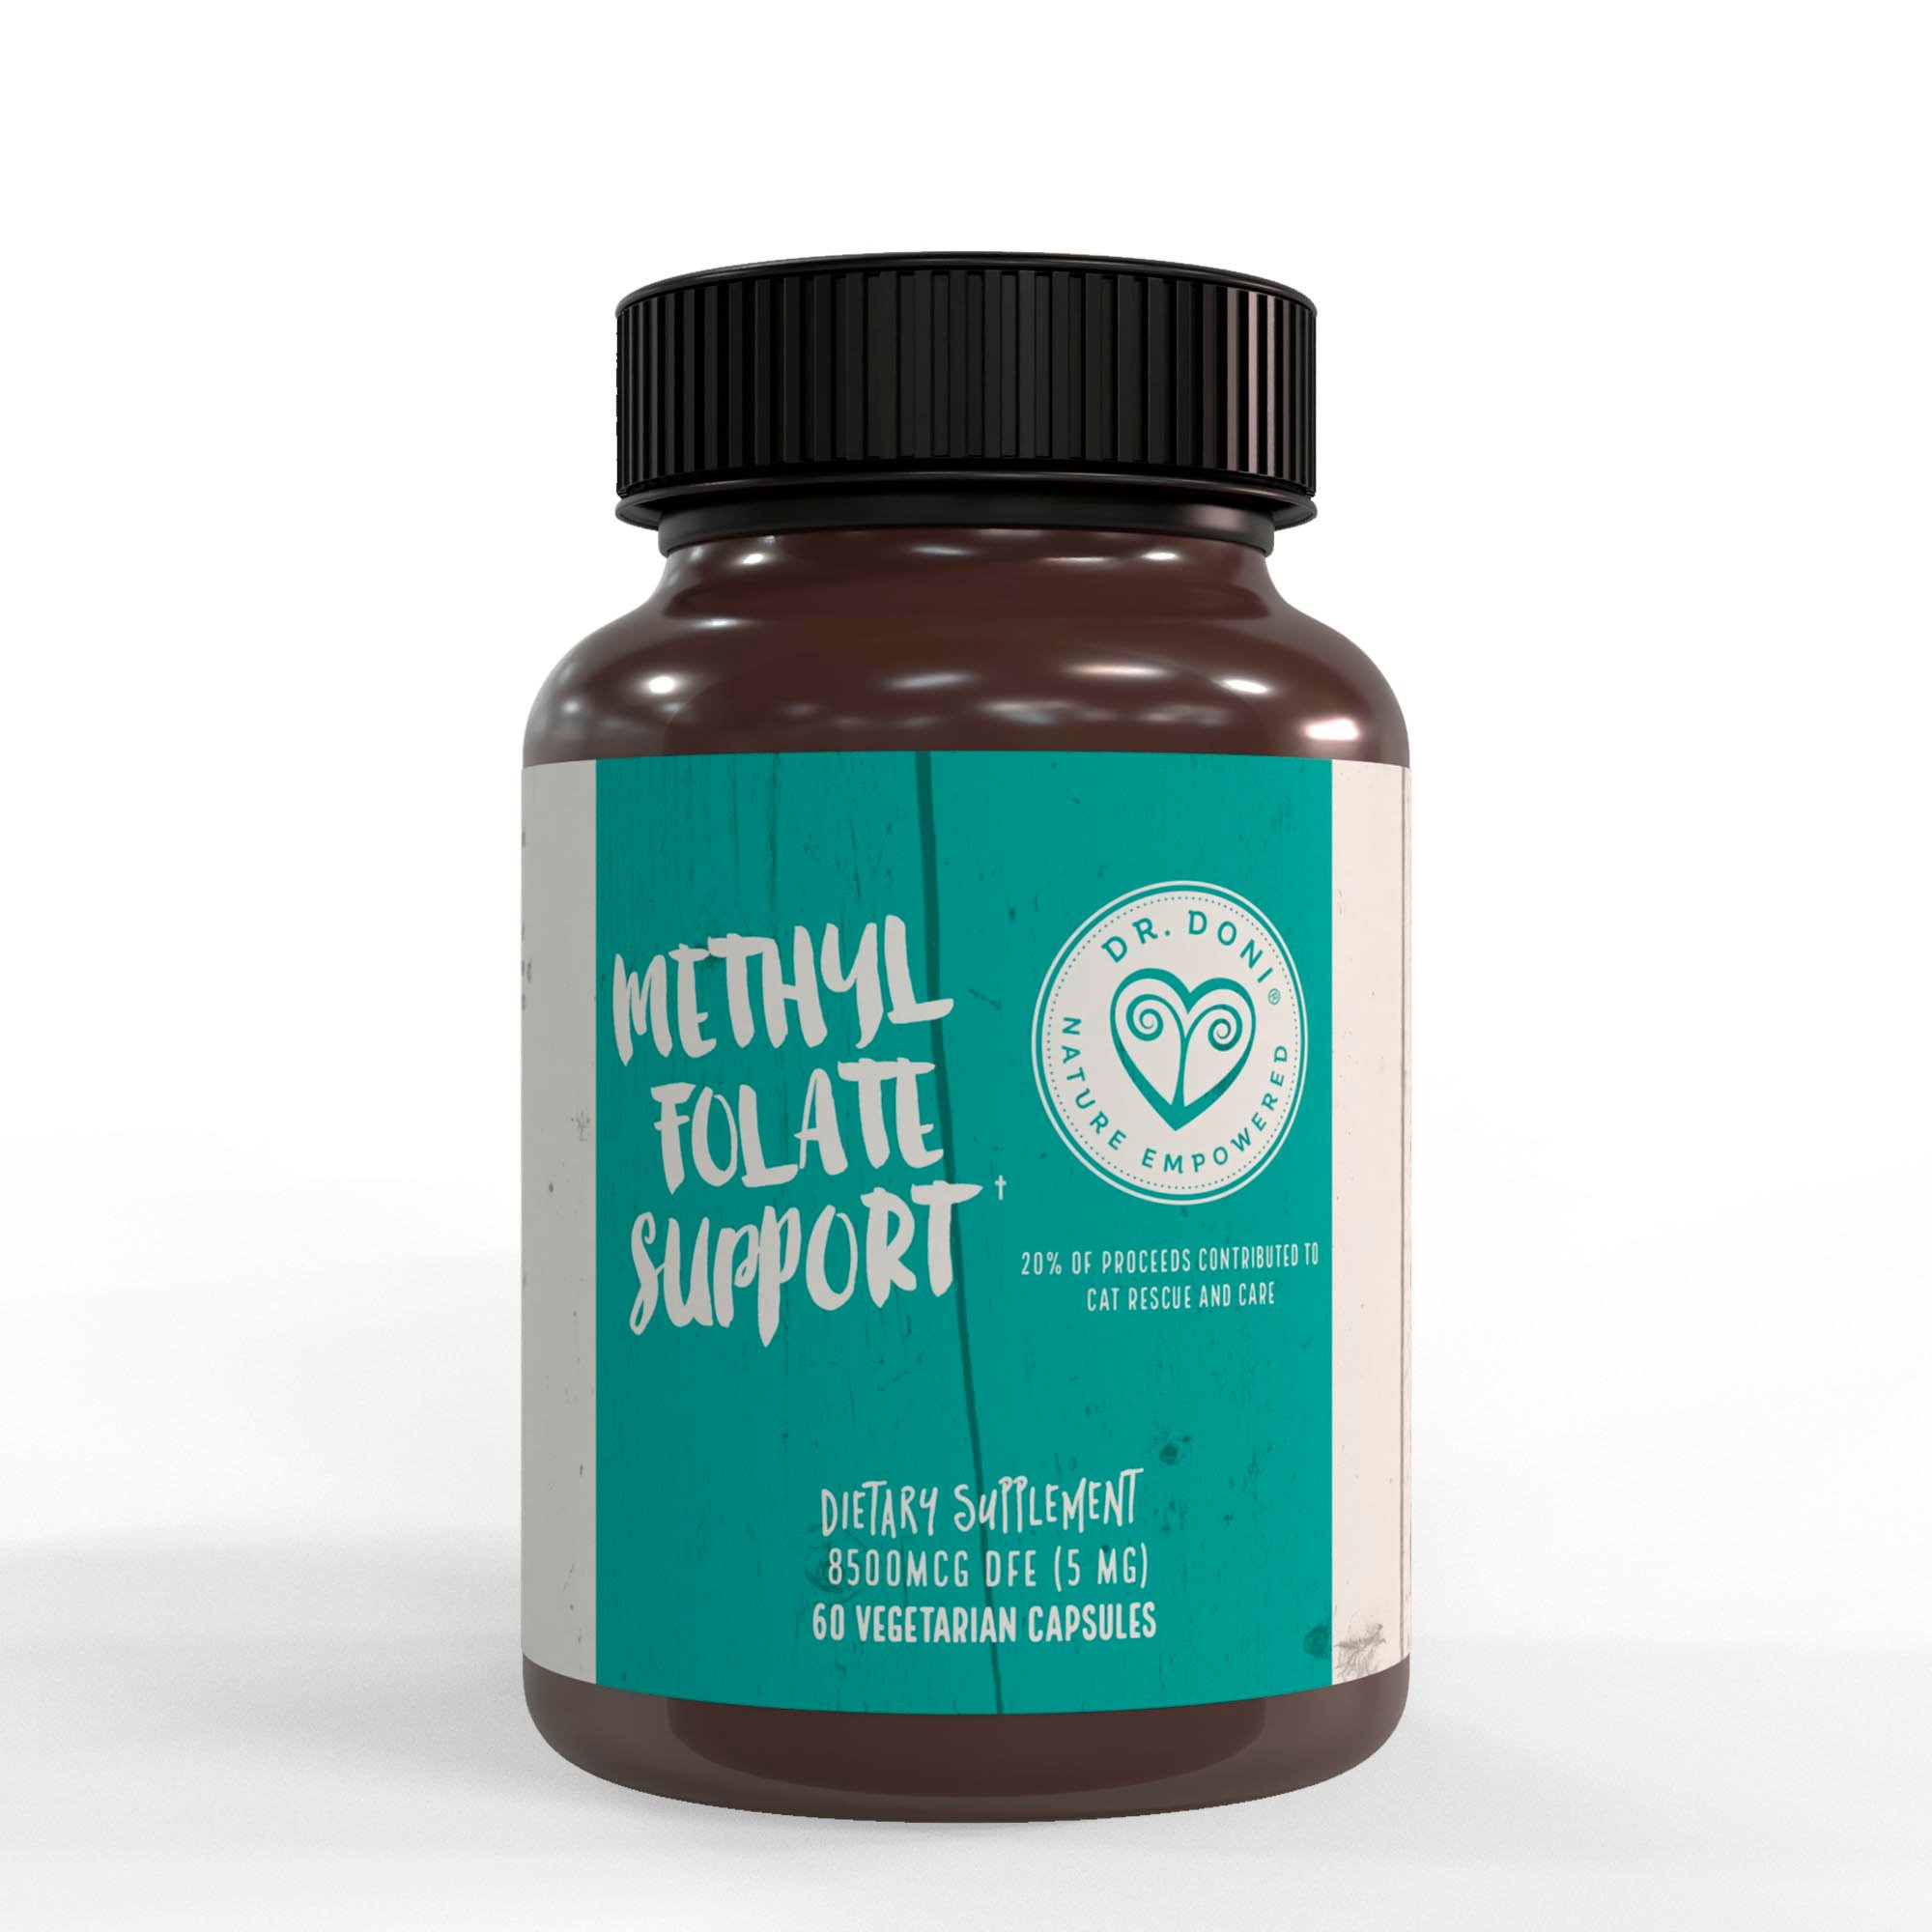 Dr. Doni's Methyl Folate Support